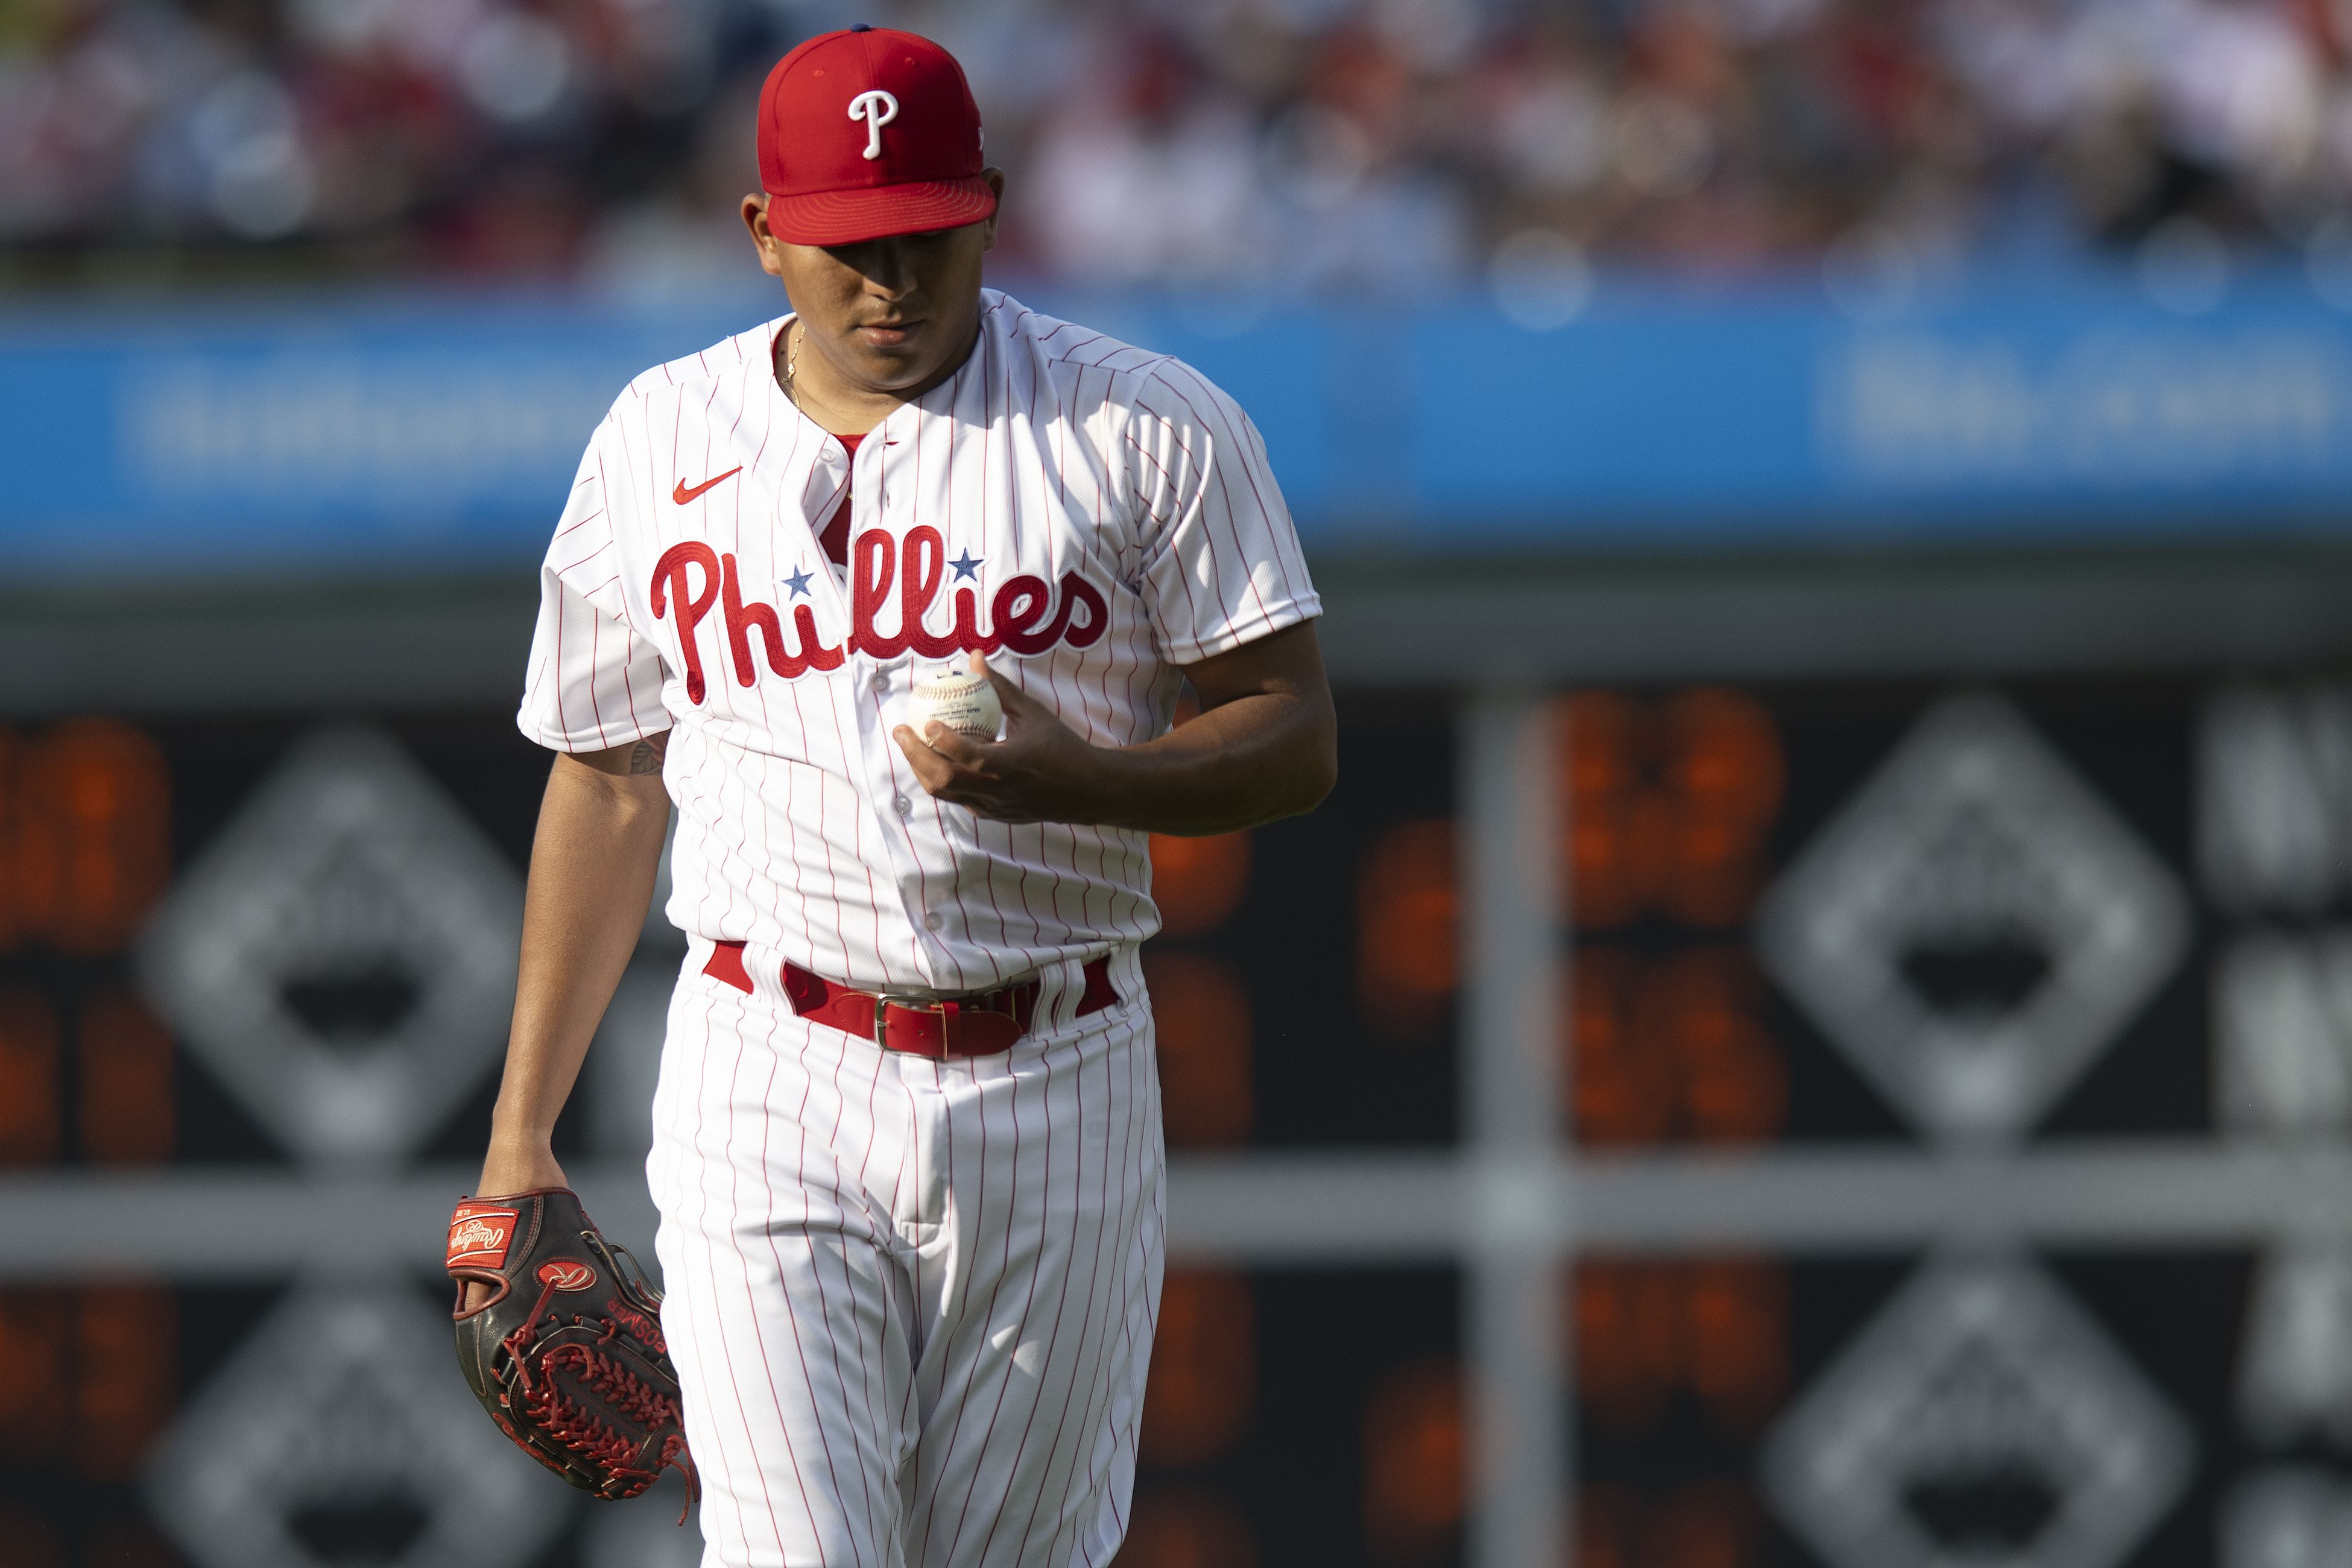 Sosa homer gives Phillies a win over the Orioles